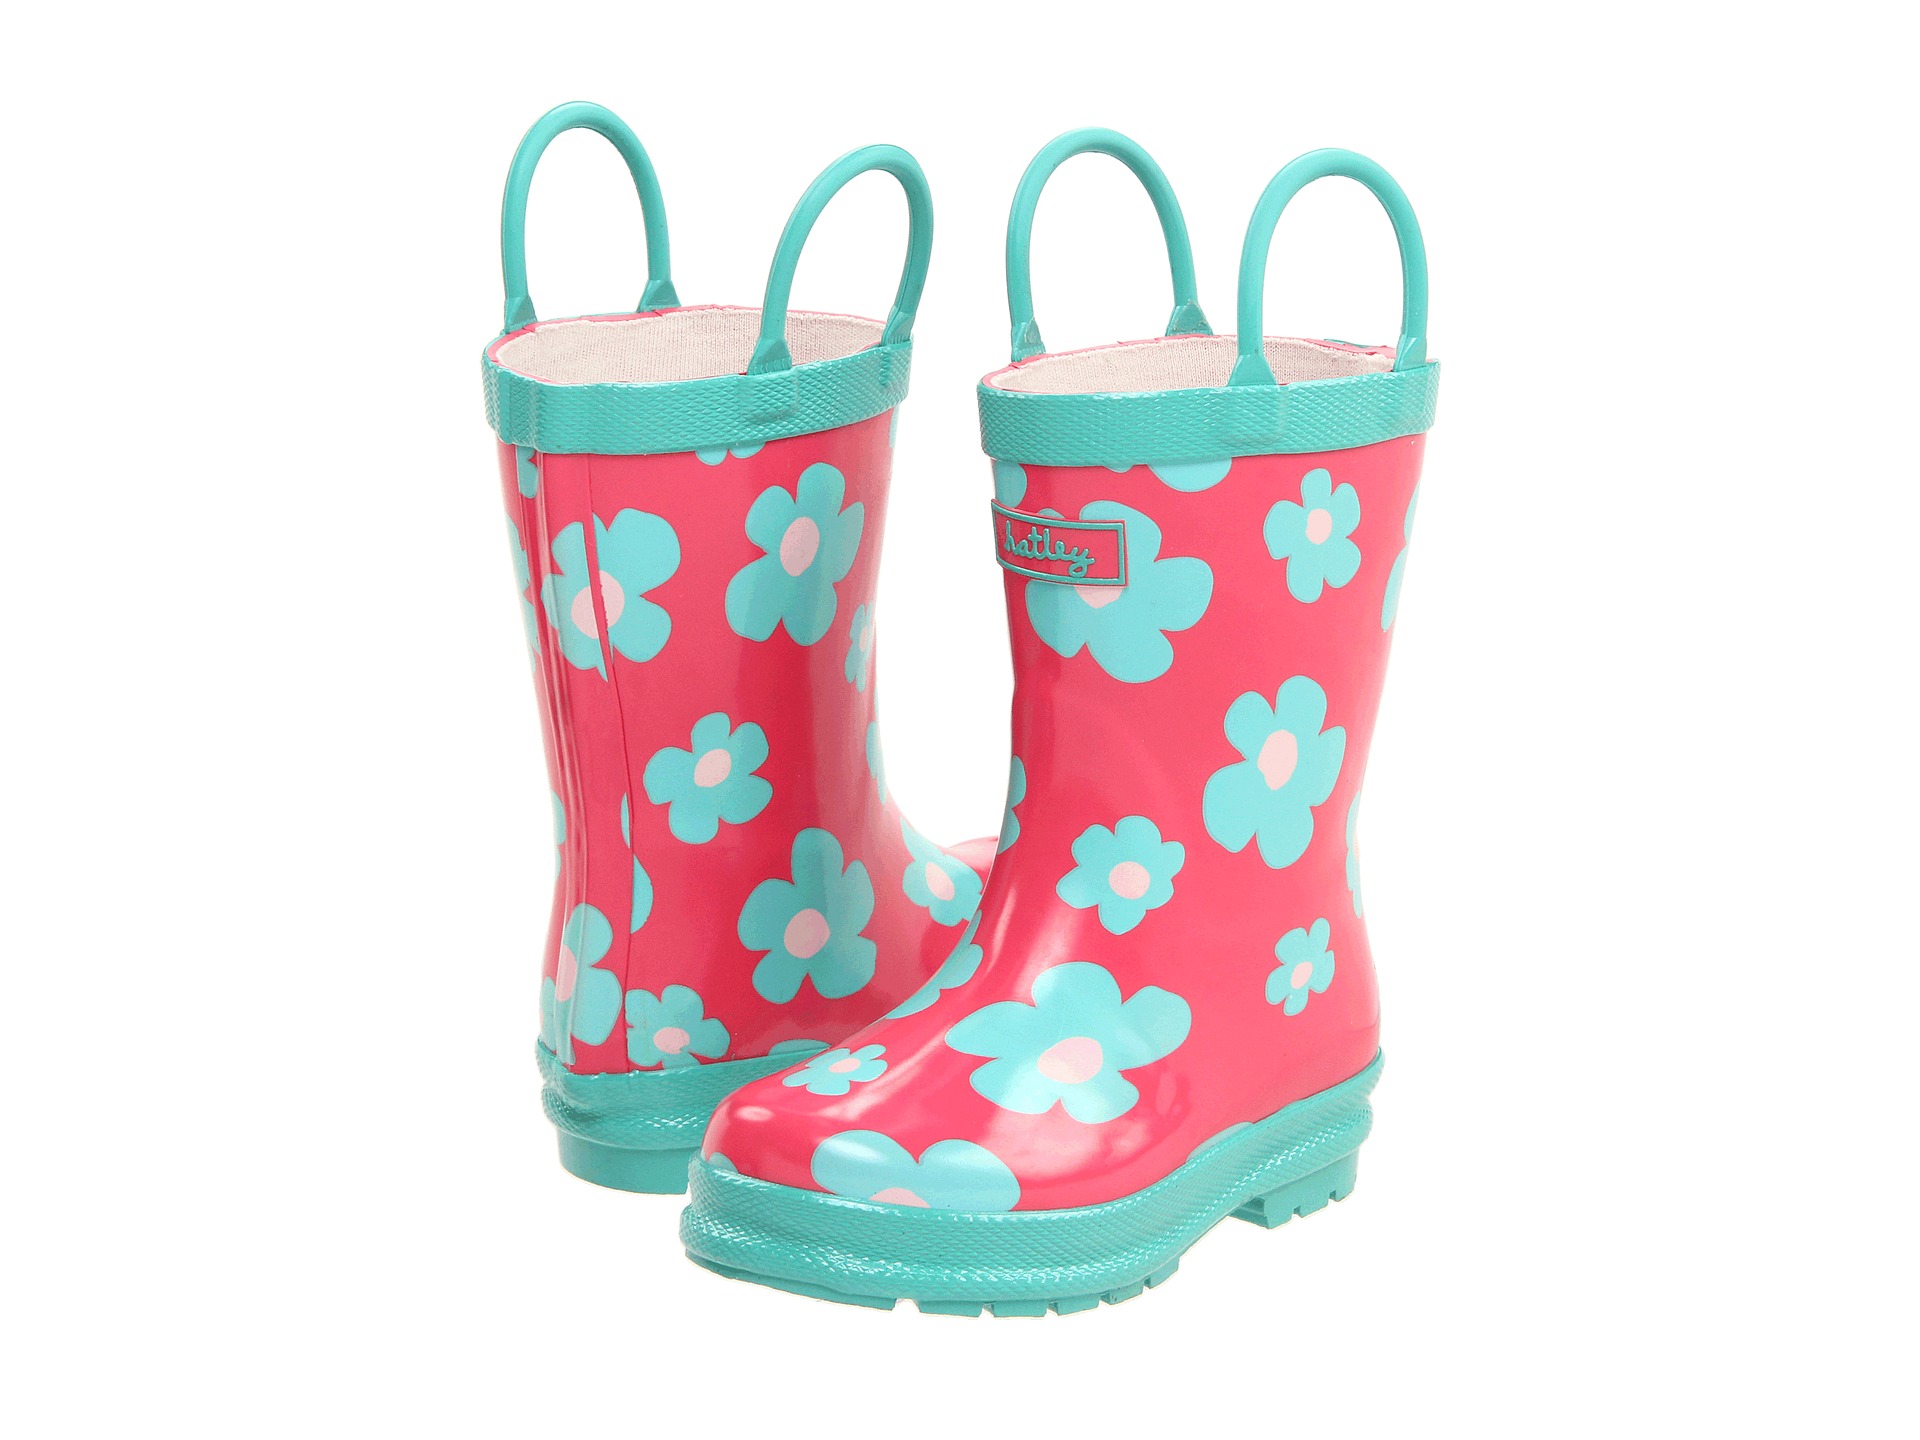 Hatley Kids Rain Boots (Infant/Toddler/Youth)    